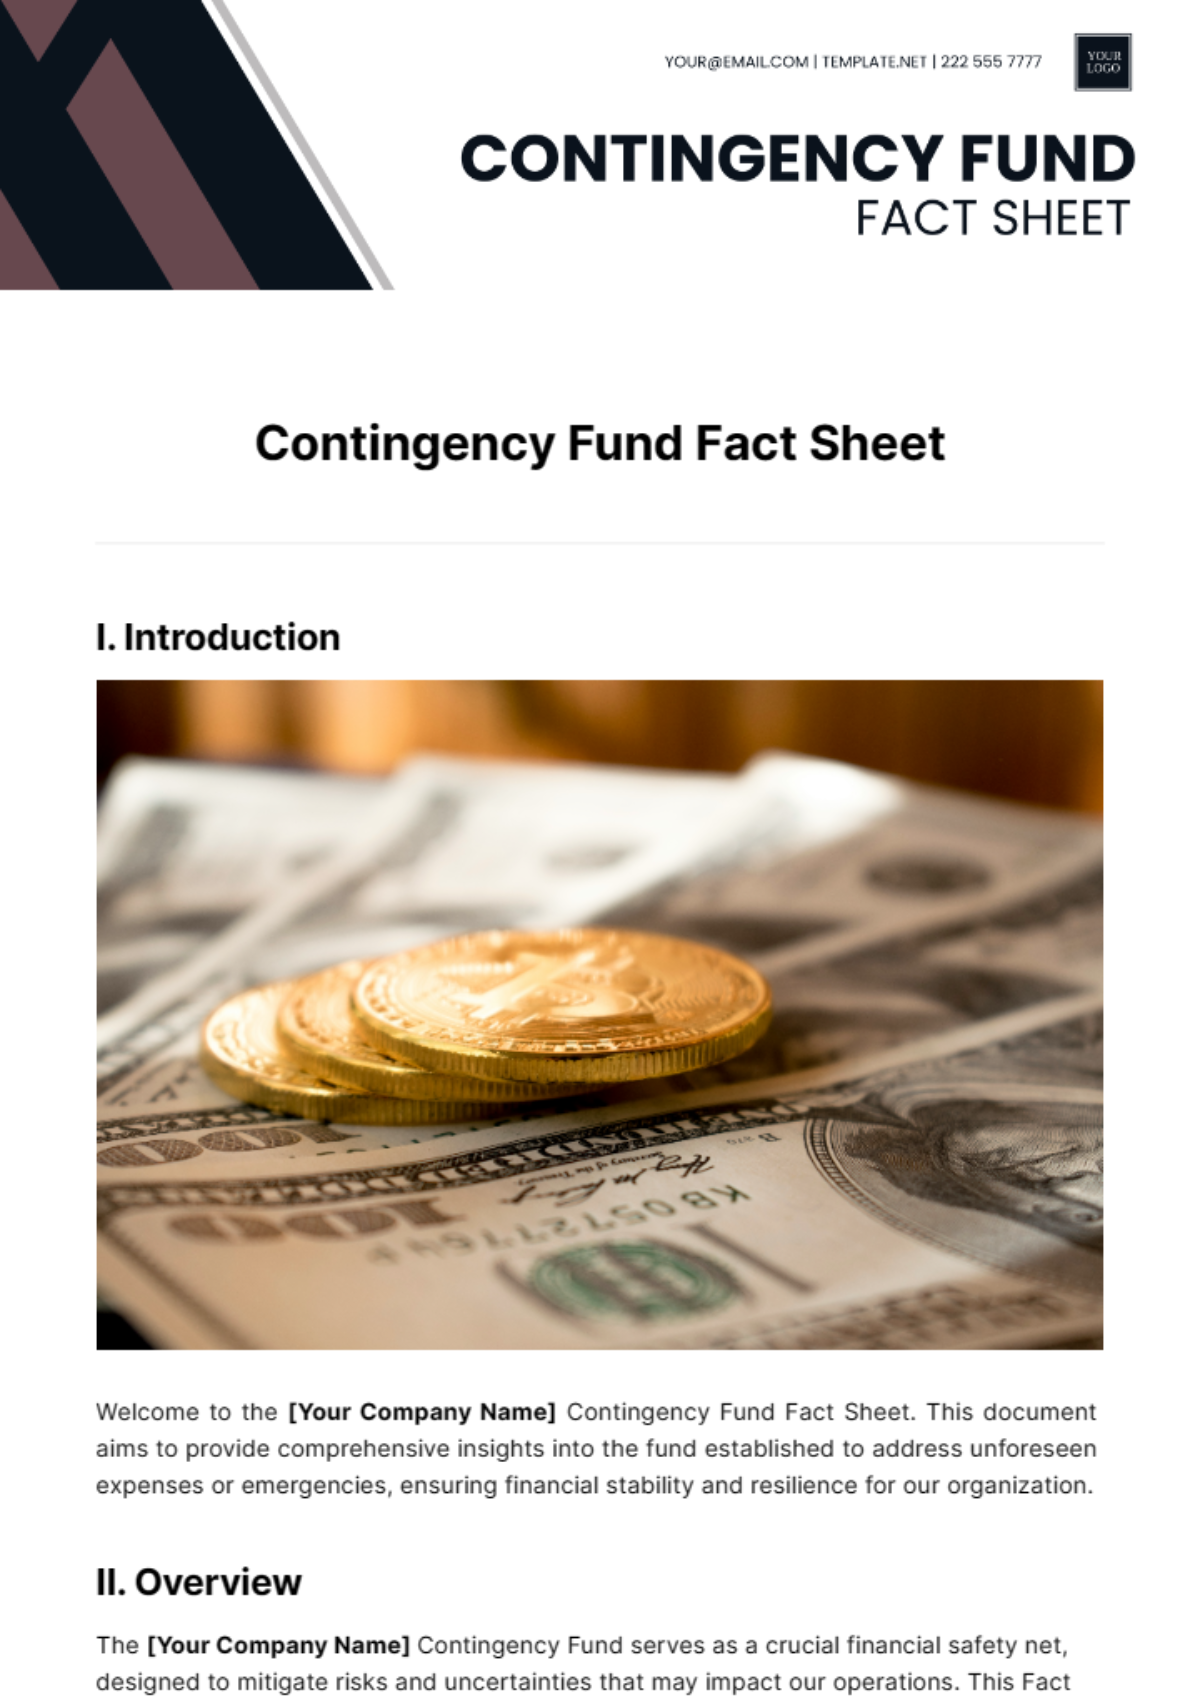 Contingency Fund Fact Sheet Template